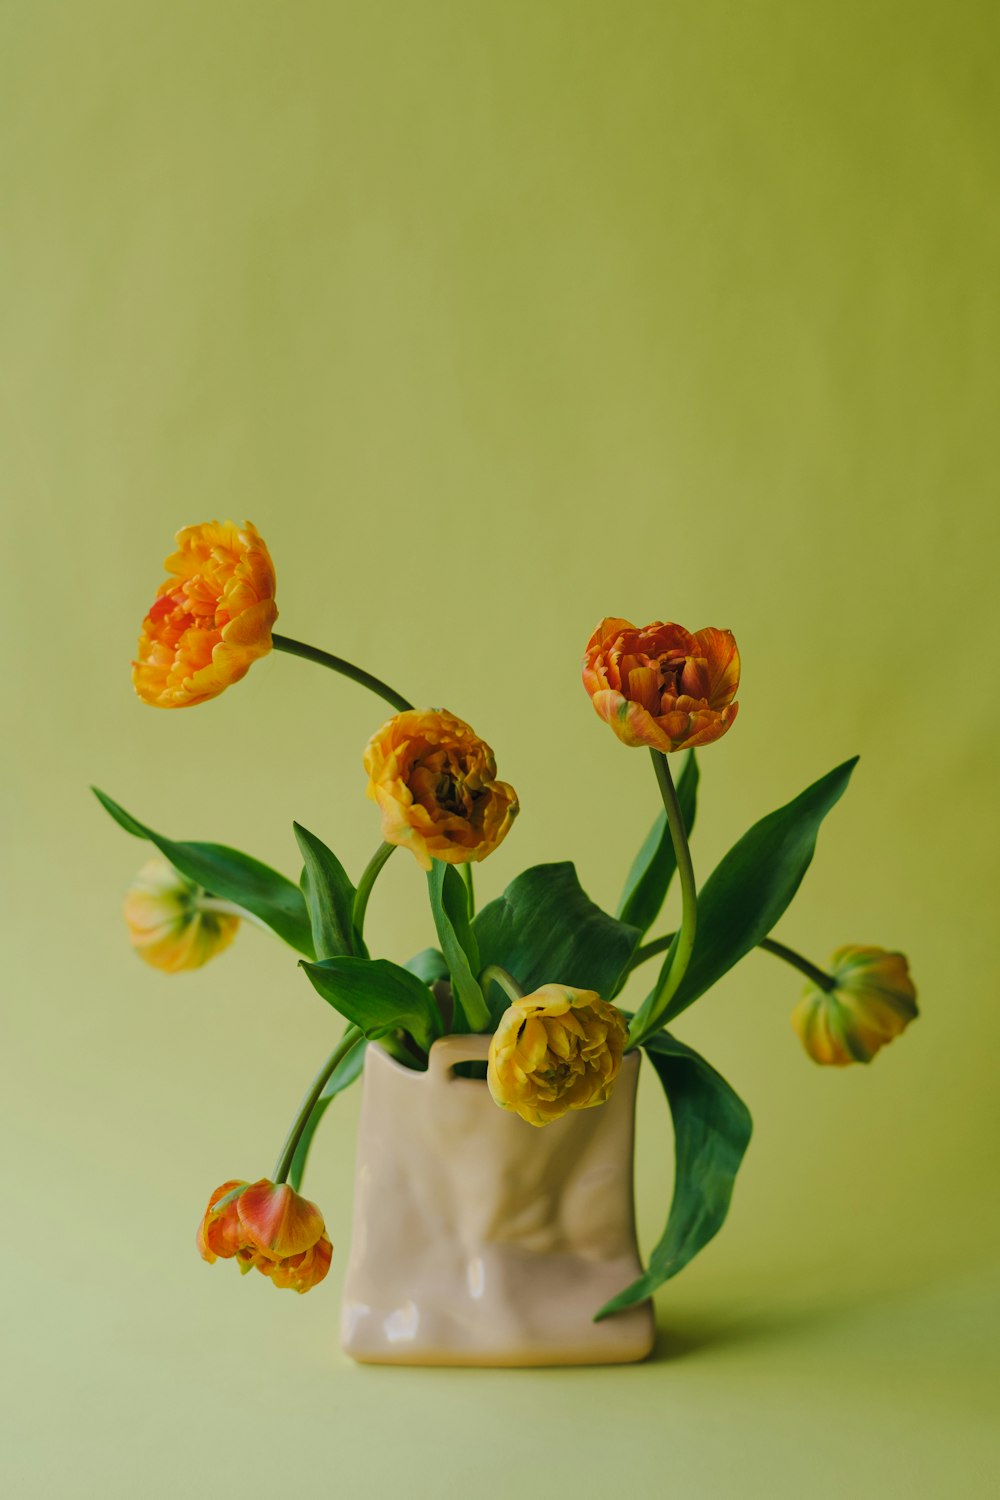 a vase with yellow and orange flowers in it